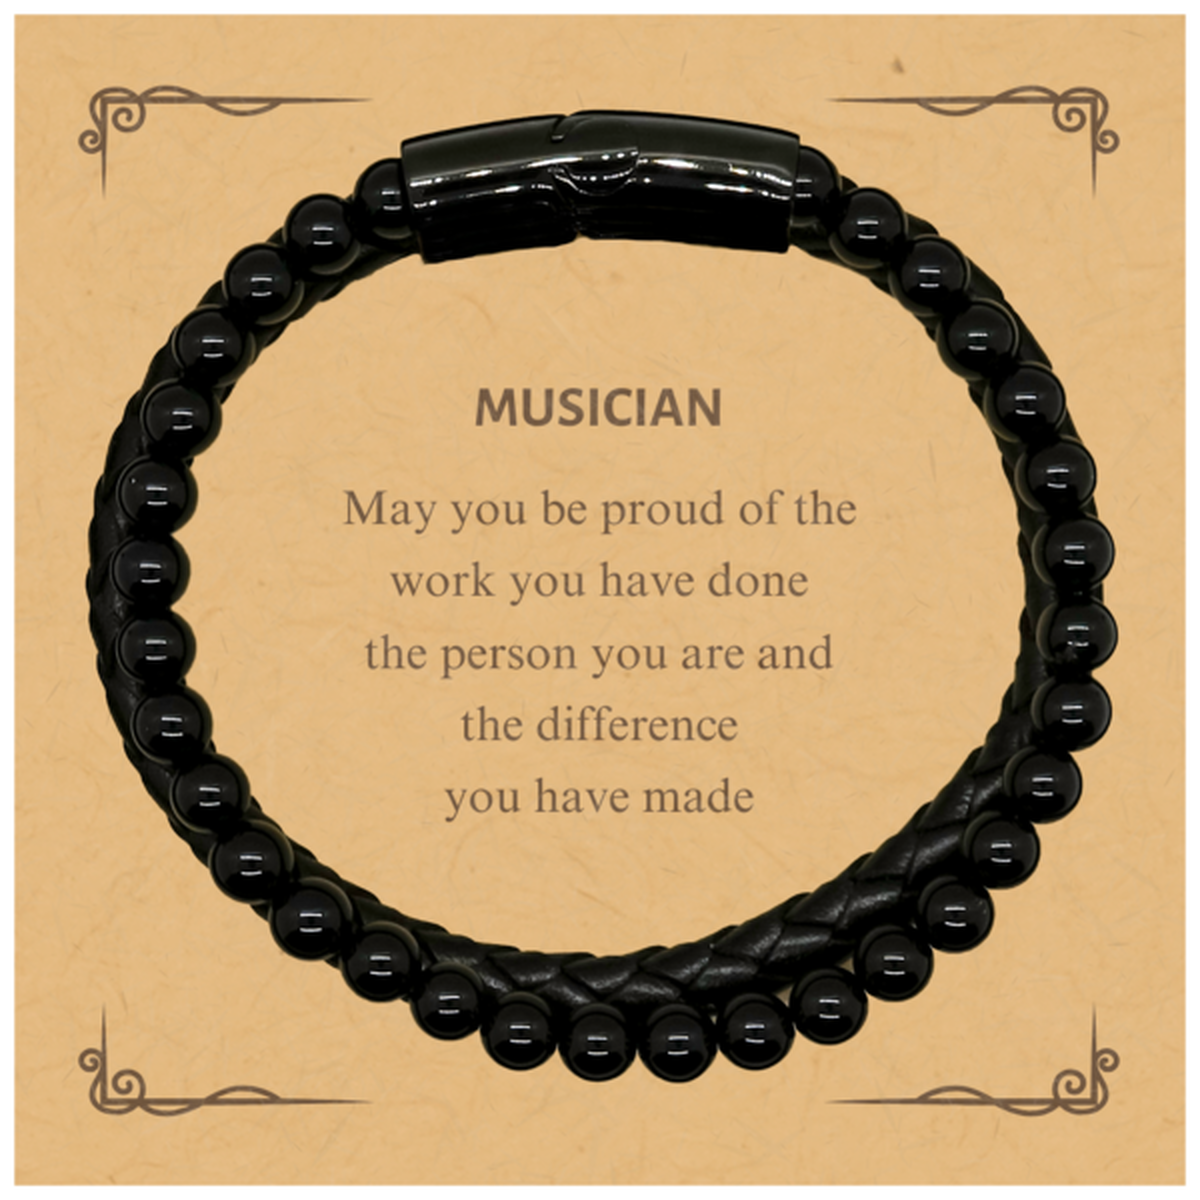 Musician May you be proud of the work you have done, Retirement Musician Stone Leather Bracelets for Colleague Appreciation Gifts Amazing for Musician